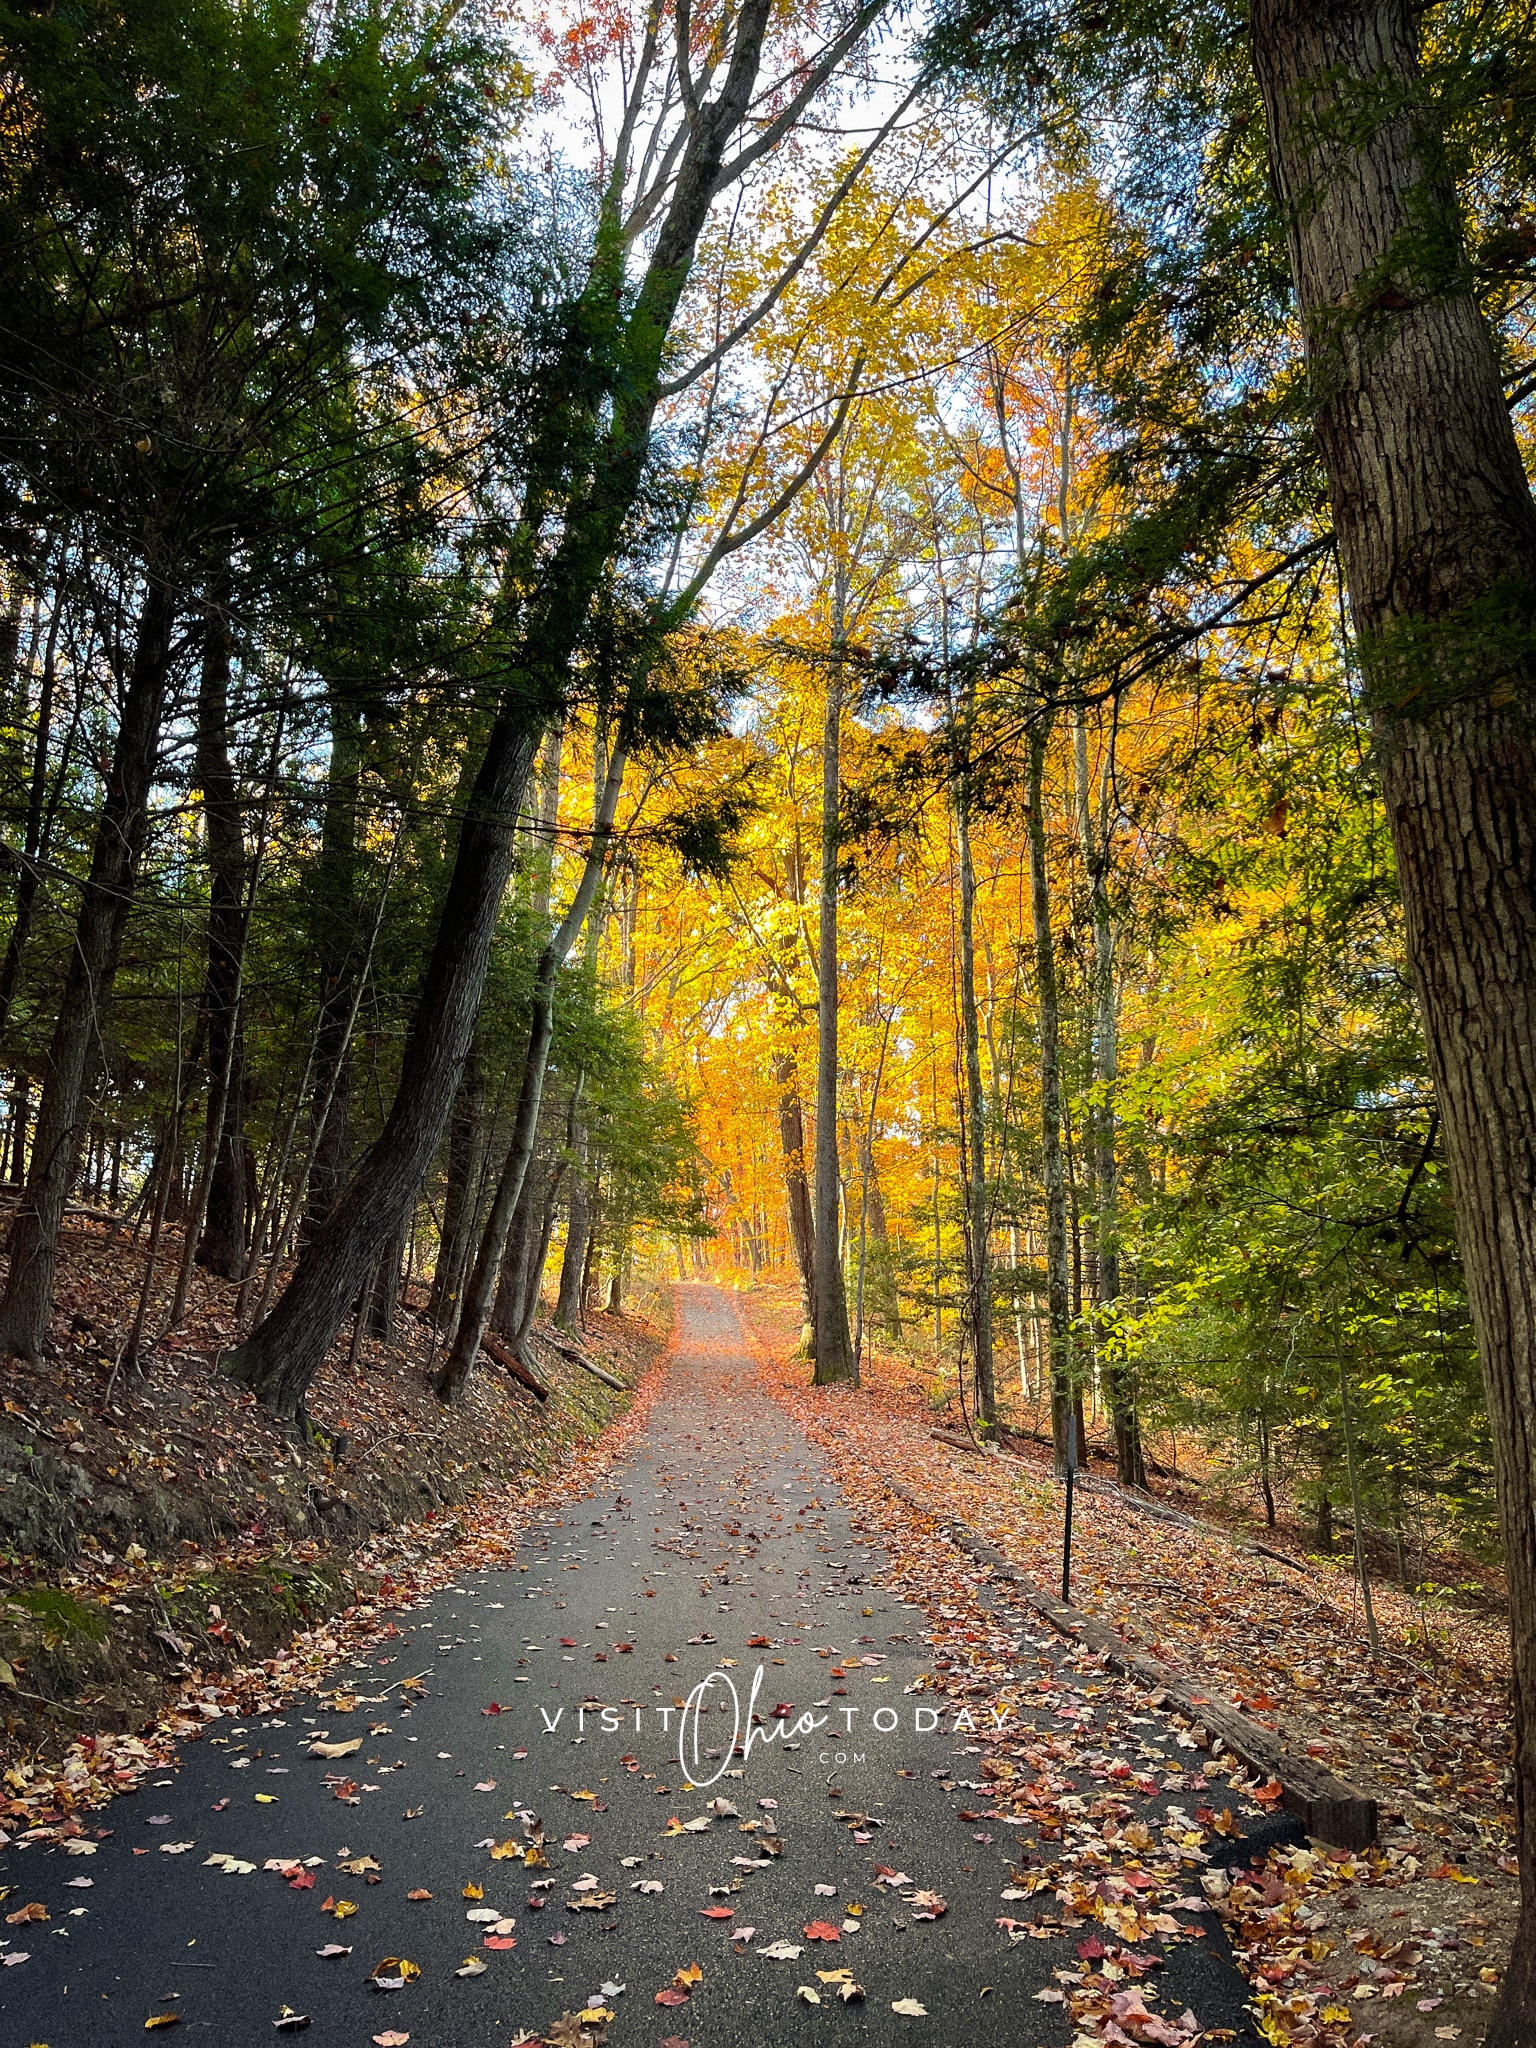 paved road with leaves on it and leading into a forest with glowing trees, fall season